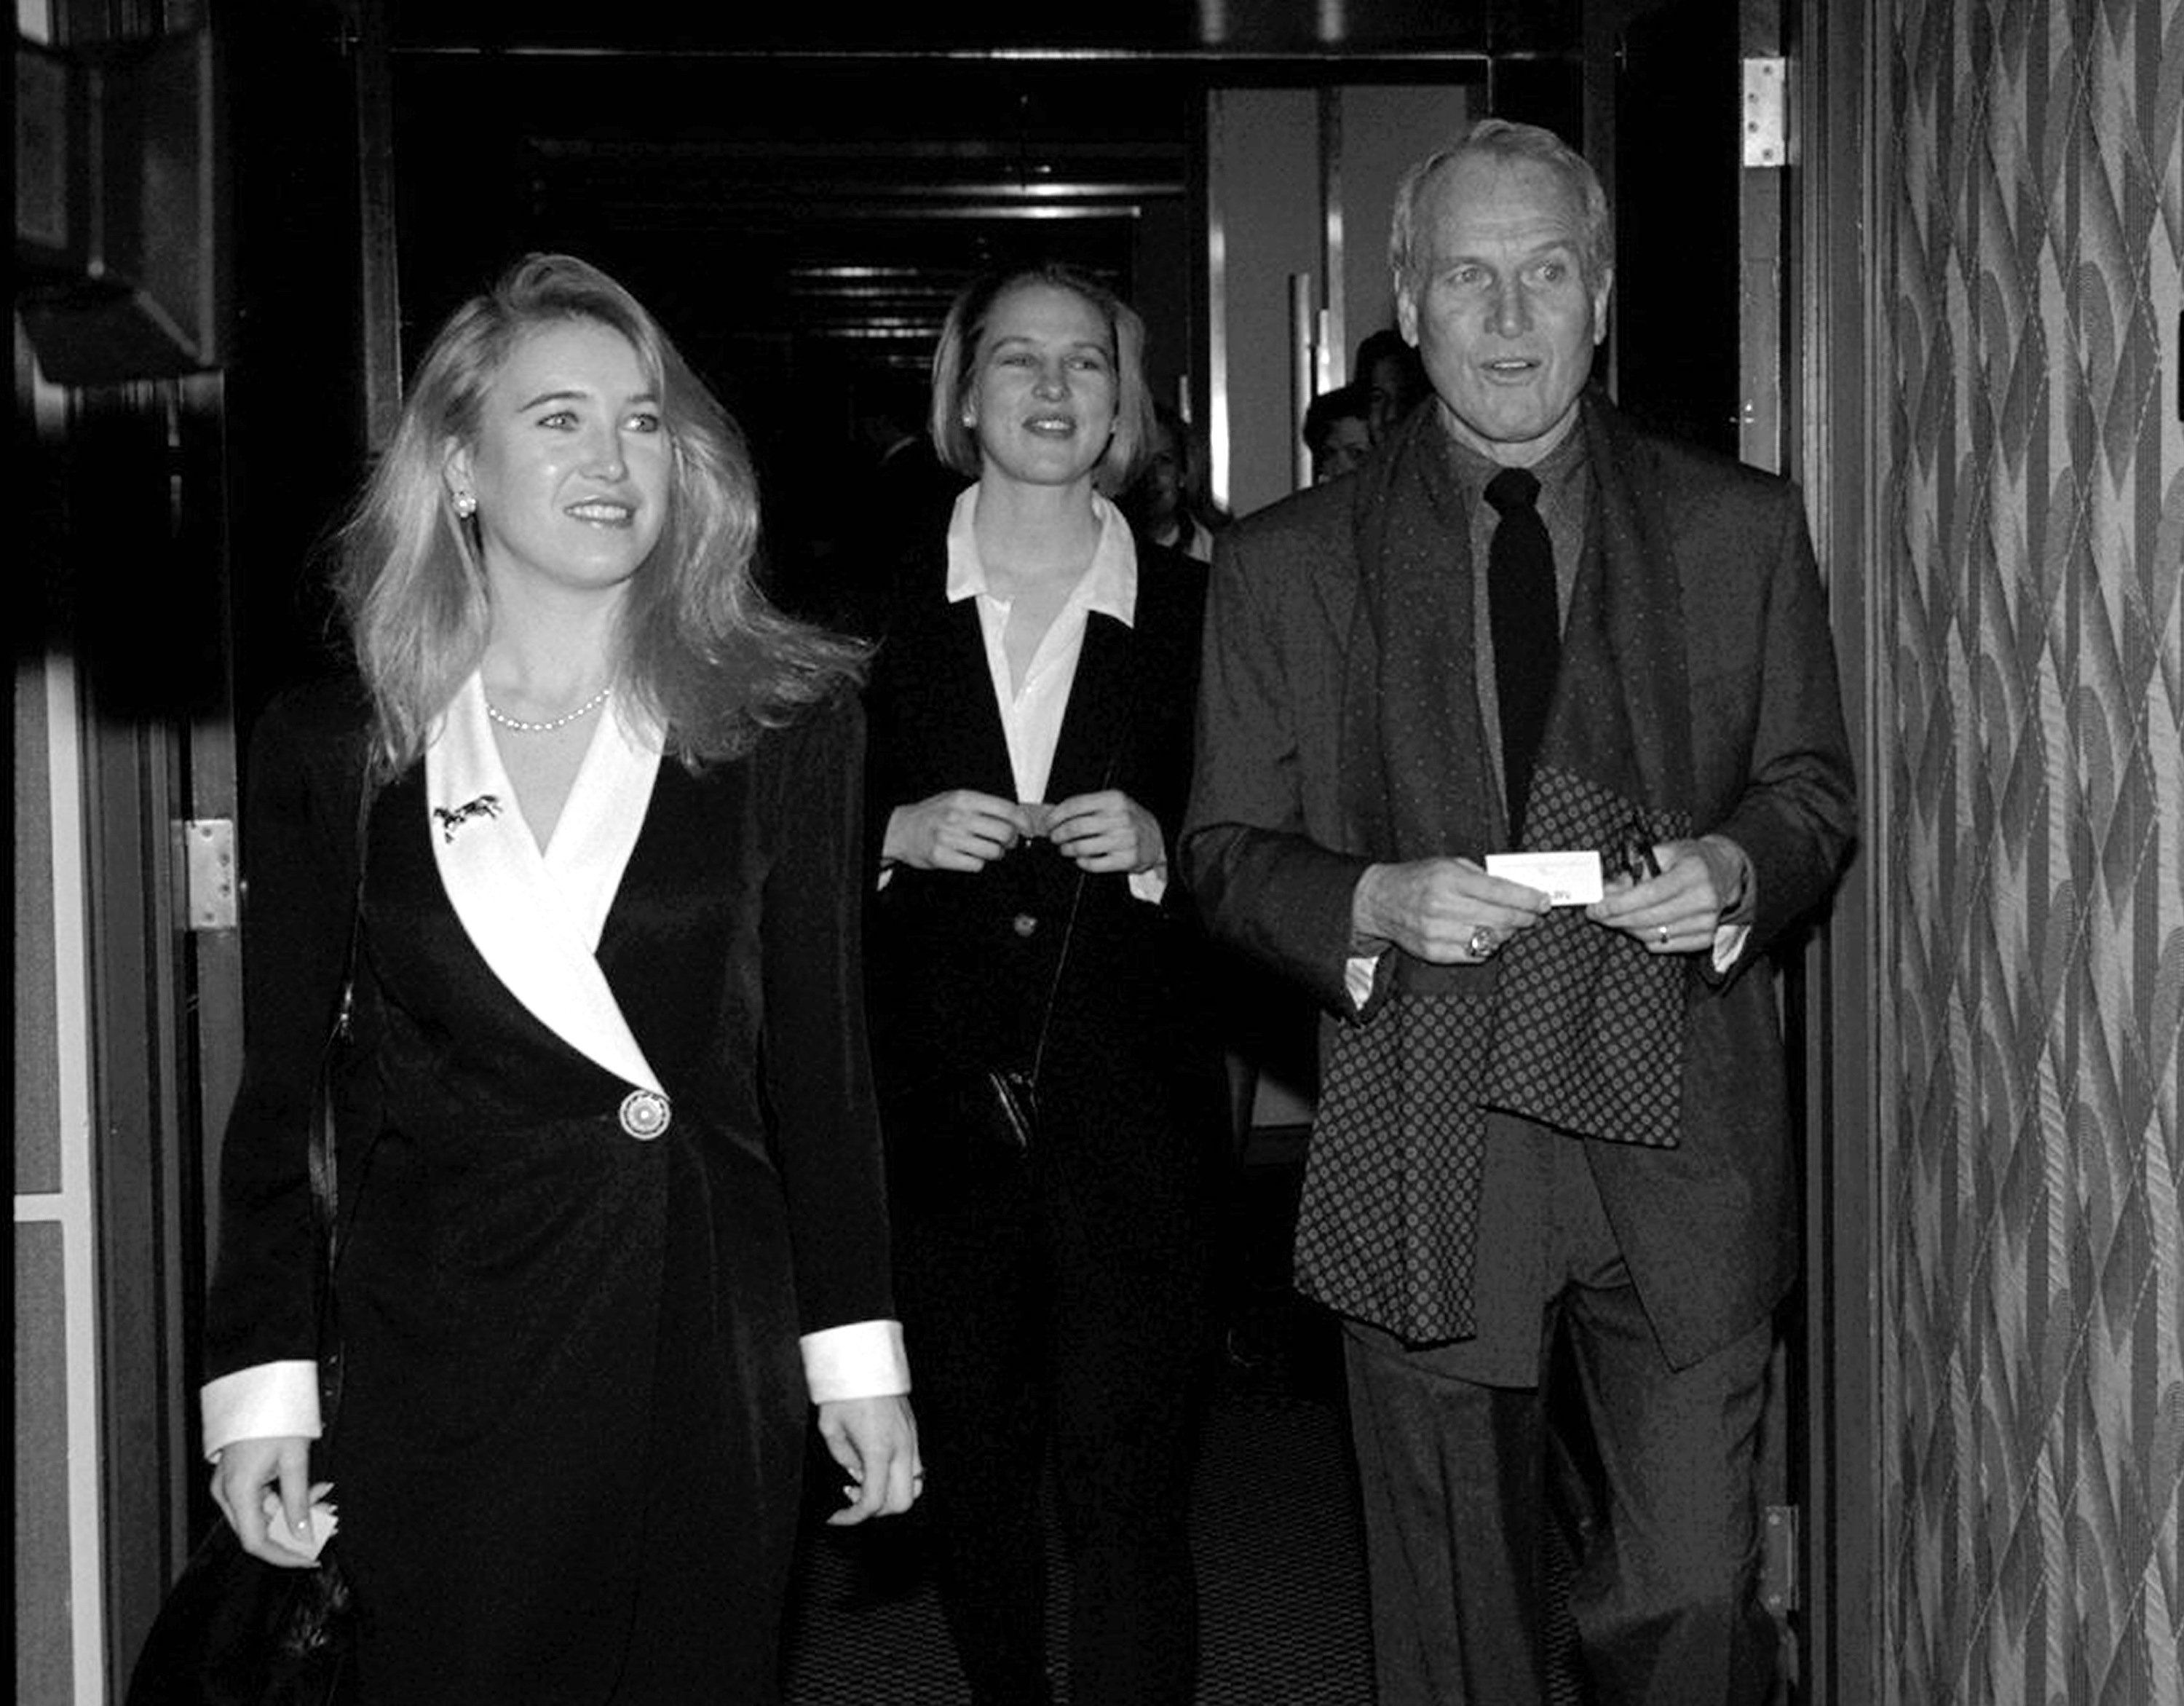 Paul Newman and his daughters Clea and Melissa at the New York film critics awards in 1995 | Source: Getty Images